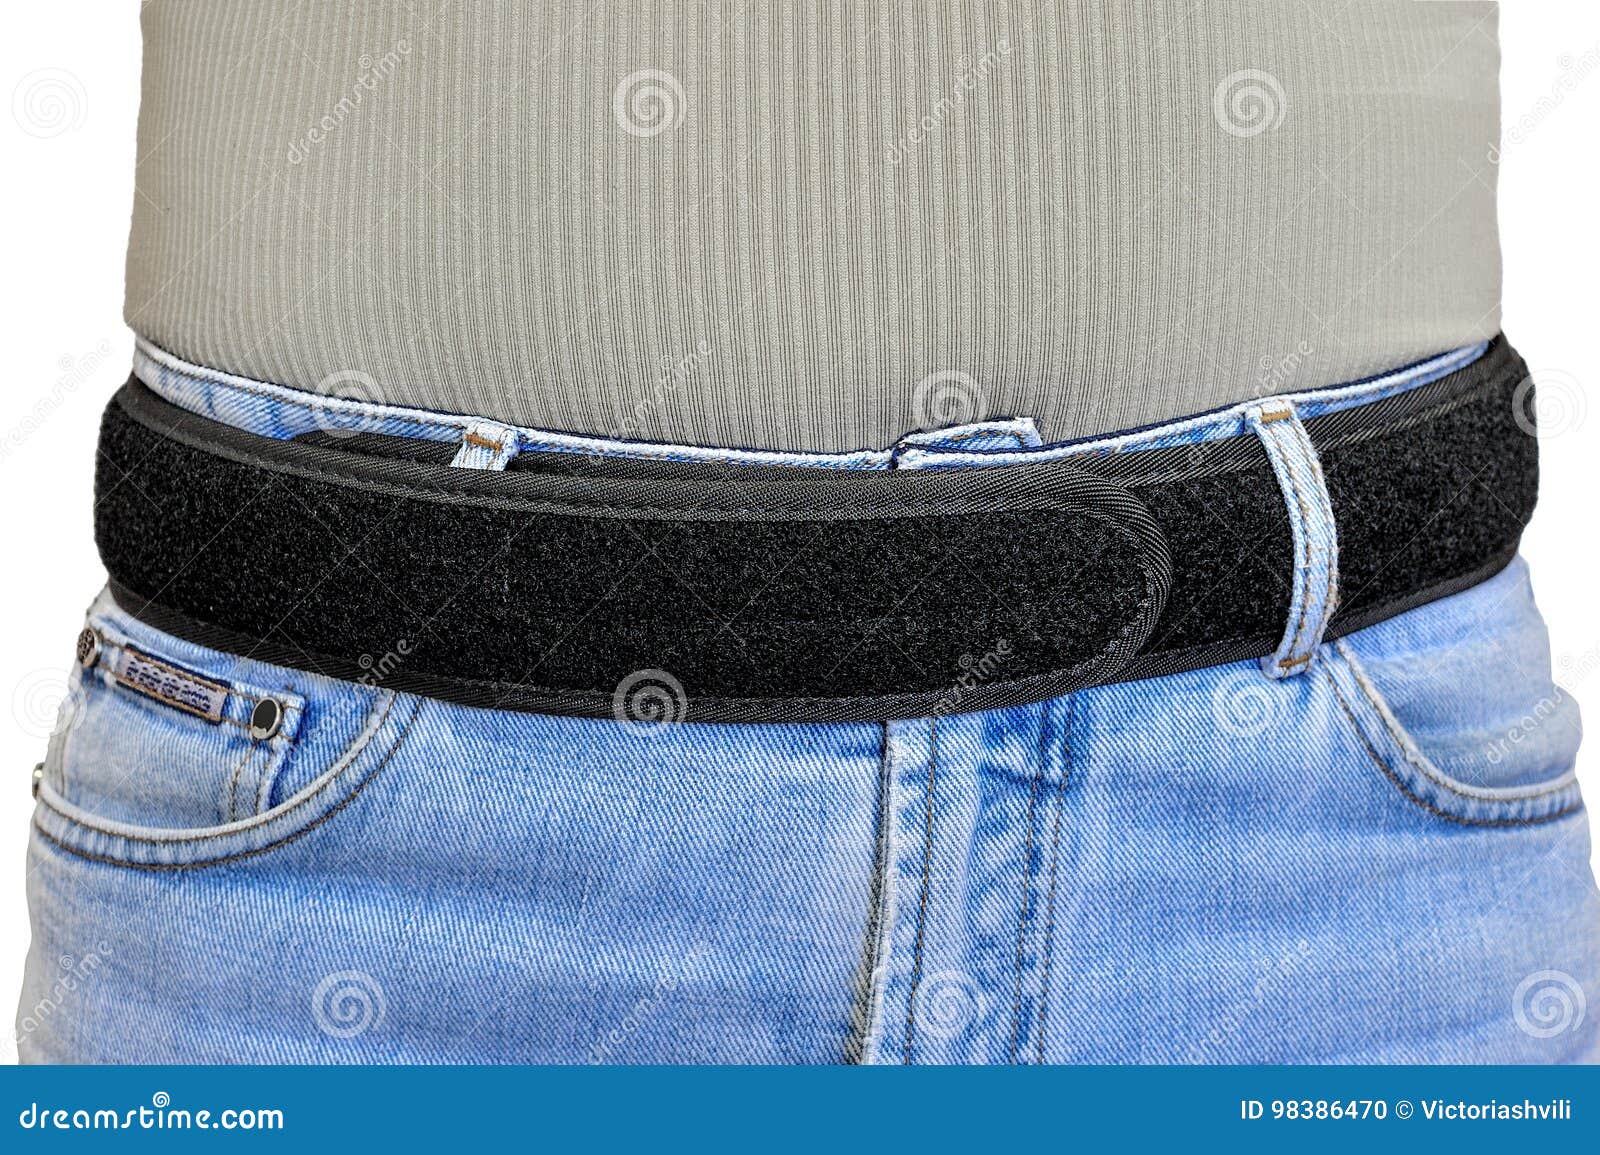 https://thumbs.dreamstime.com/z/military-tactical-belt-velcro-fastening-system-wearing-man-isolated-close-up-98386470.jpg